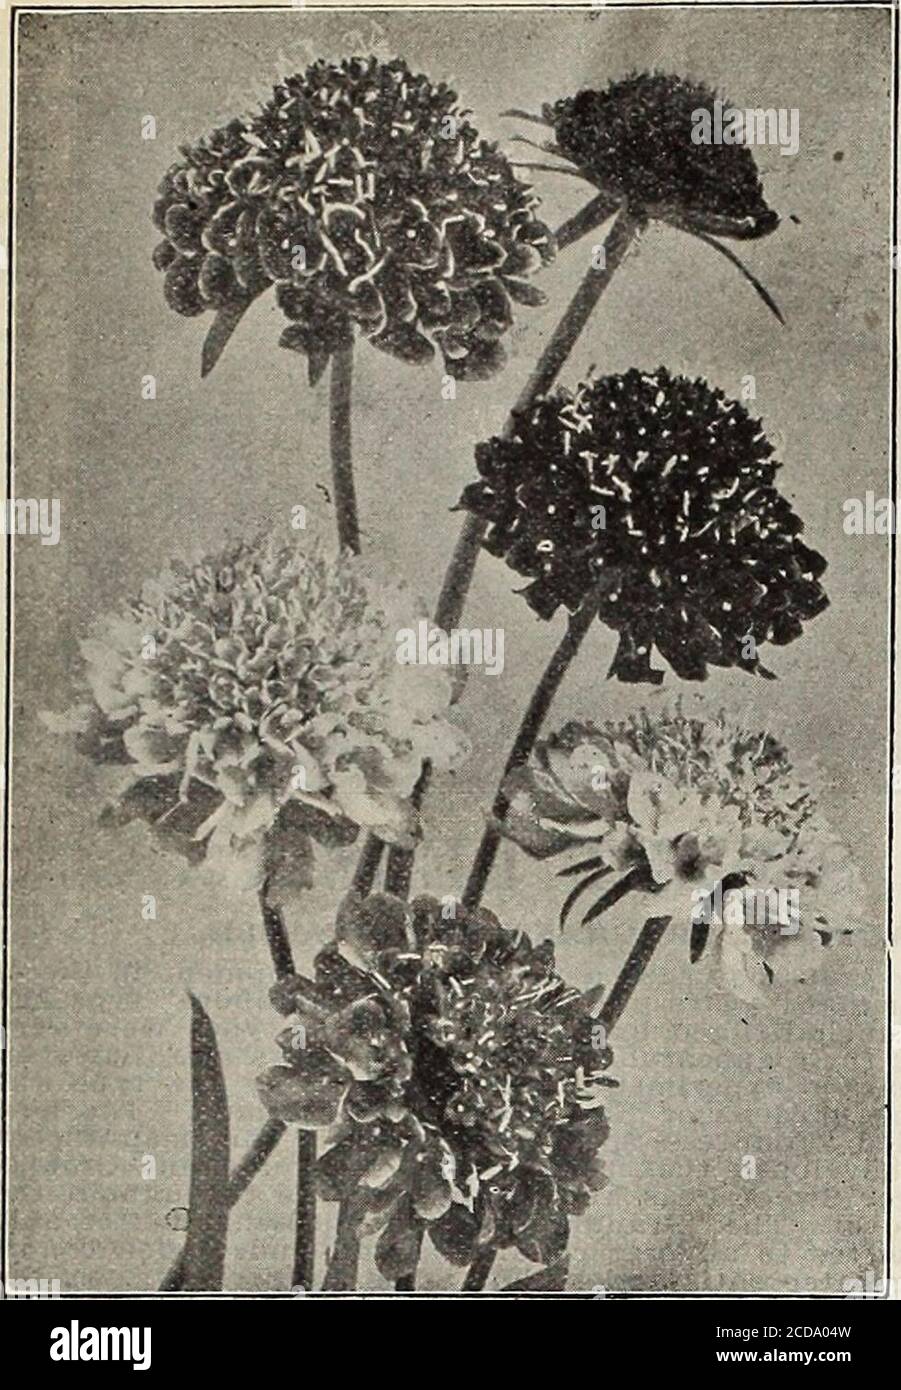 . Farm and garden annual : spring 1913 . SALVIA BO.NFIRE. LIST OP CHOICE FLOWER SEEDS FOR 1913. 85. SCABIOSA OE MOURNING BEIDB. SALPIGLOSSIS. Very pretty autumn blooming plants with funnel-shaped flowers, beau-tifully veined and marbled. H. H. A. Pkt. Large Flowered, Finest Mixed—Vt oz. 20c 5 Emperor—Magnificent and brilliant flowered, rivaling the Orchid in the beauty and brilliance of their blobms. Mixed colors .*; 5 SAPONARIA. Corr.pact-growing plants, producing beautiful star-like flowers freelyall summer. Good for bedding. H. A. Pkt Culabrica, pink; Calabrica Alba, white^-.each 5 SCABIOSA Stock Photo